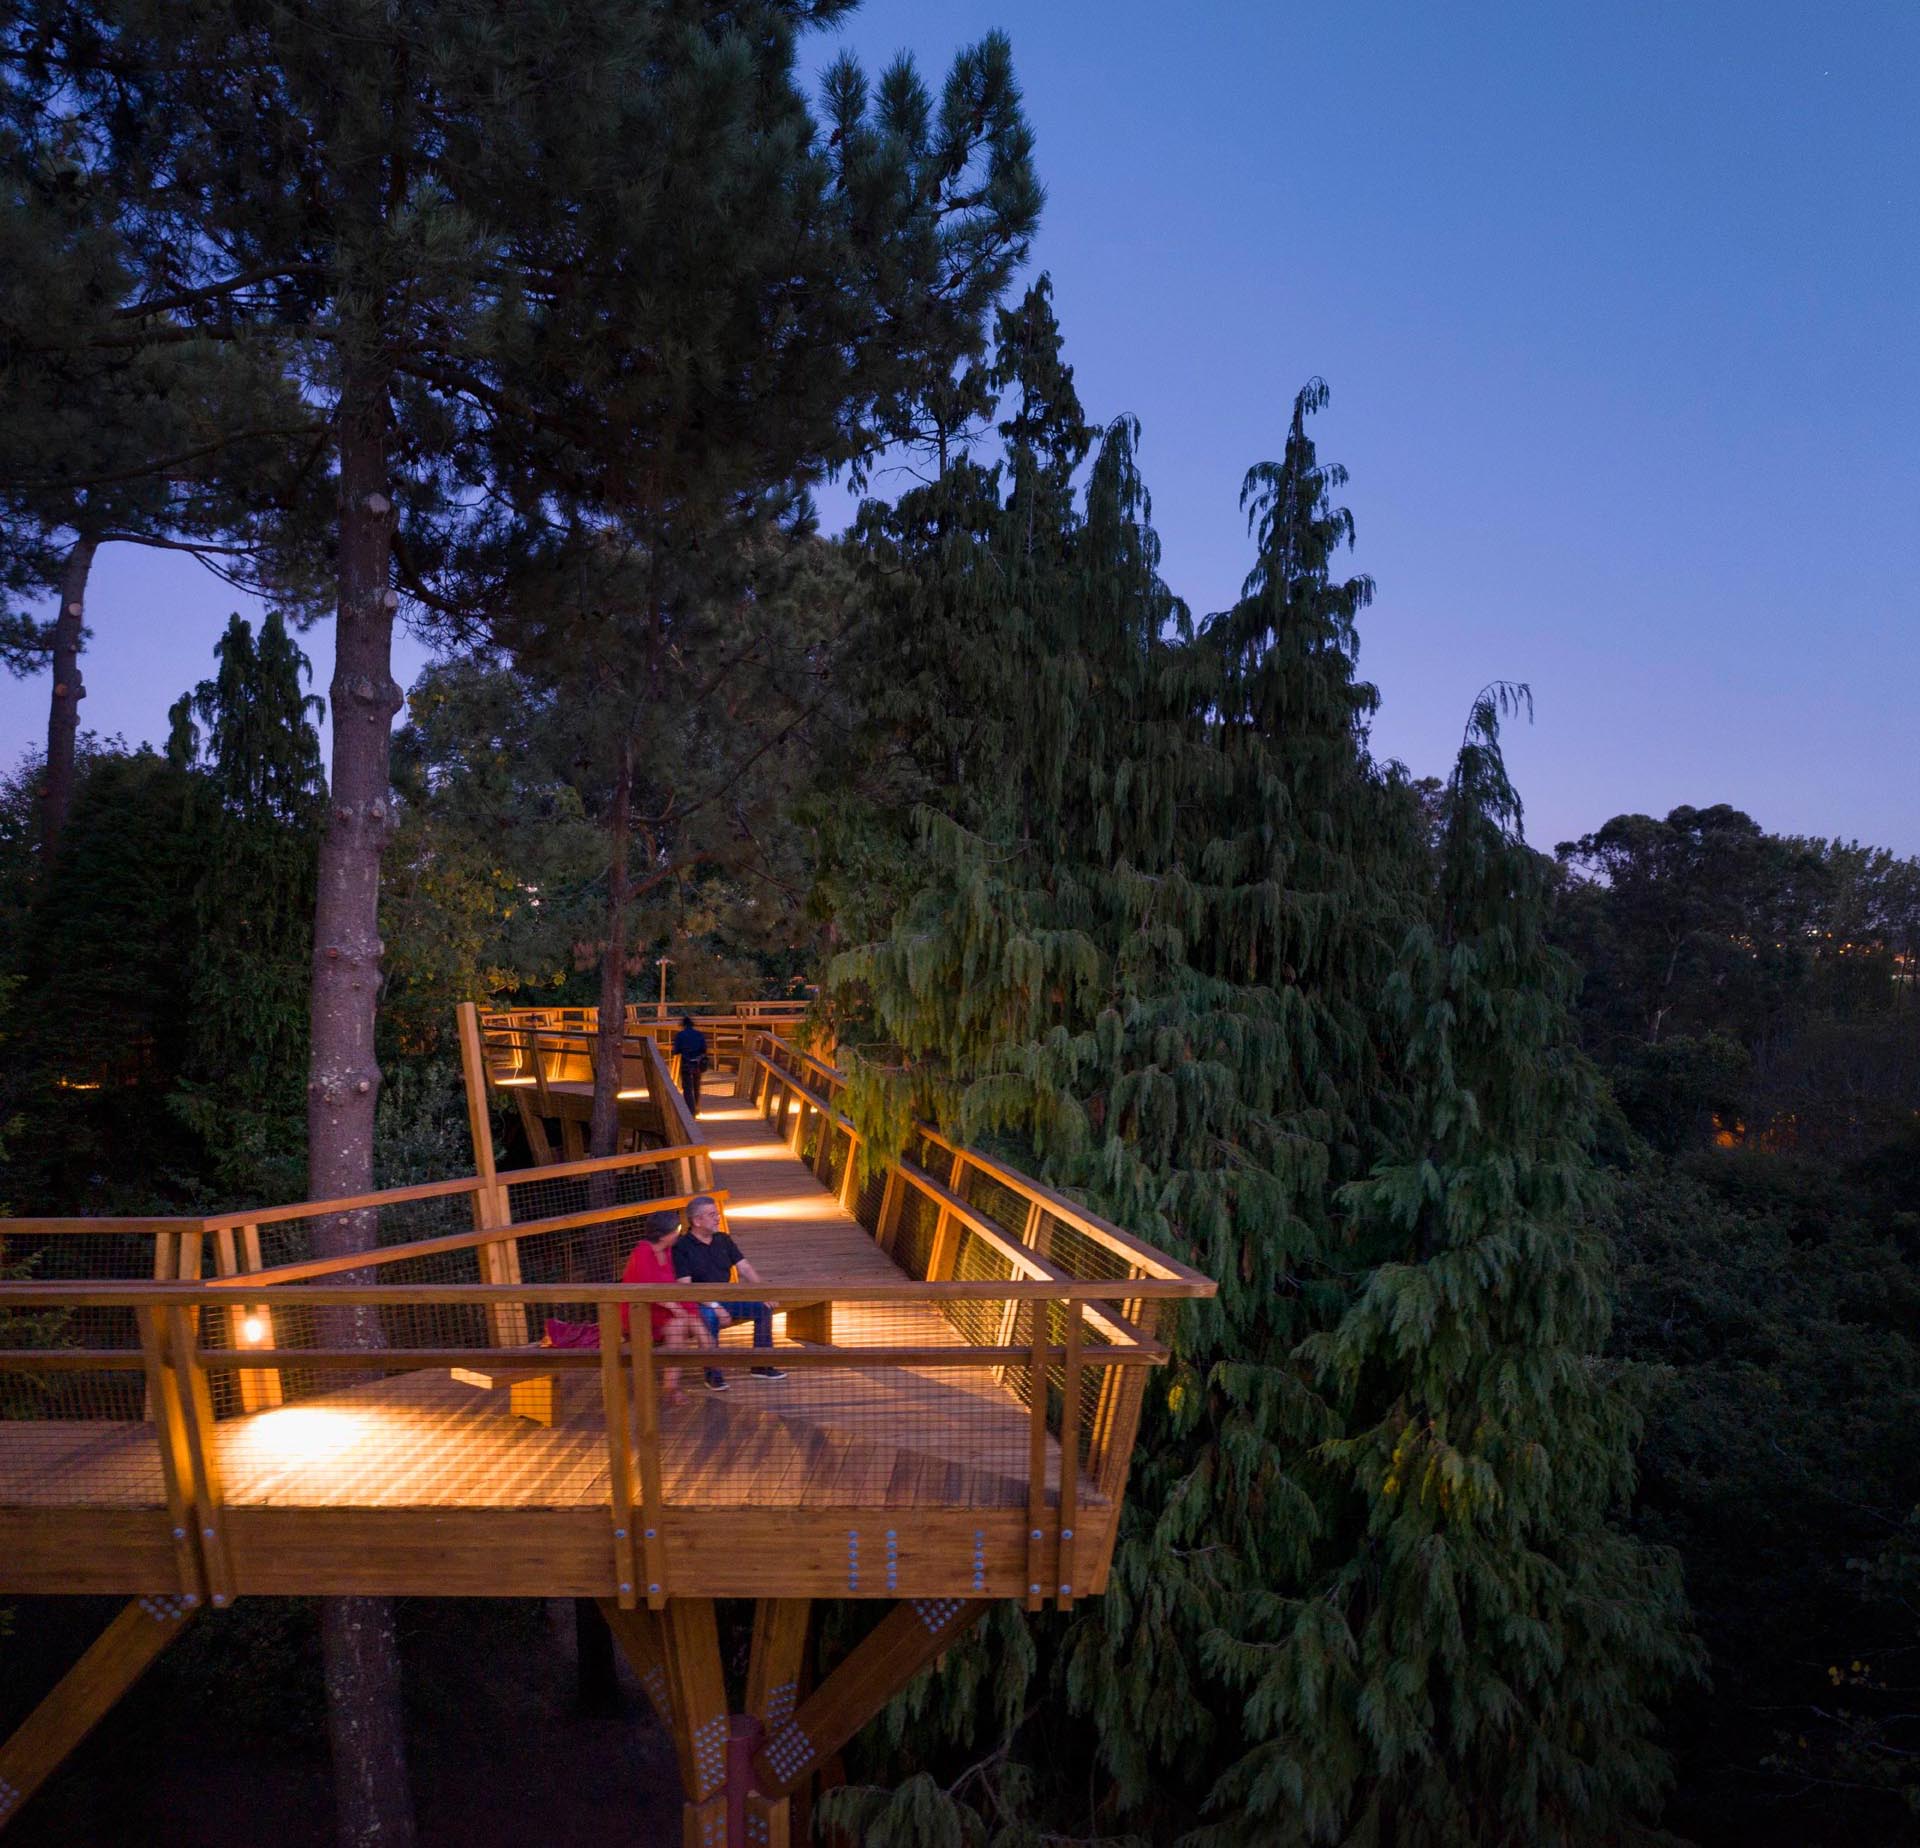 A treetop canopy walk in Portugal has lighting for nighttime strolls.